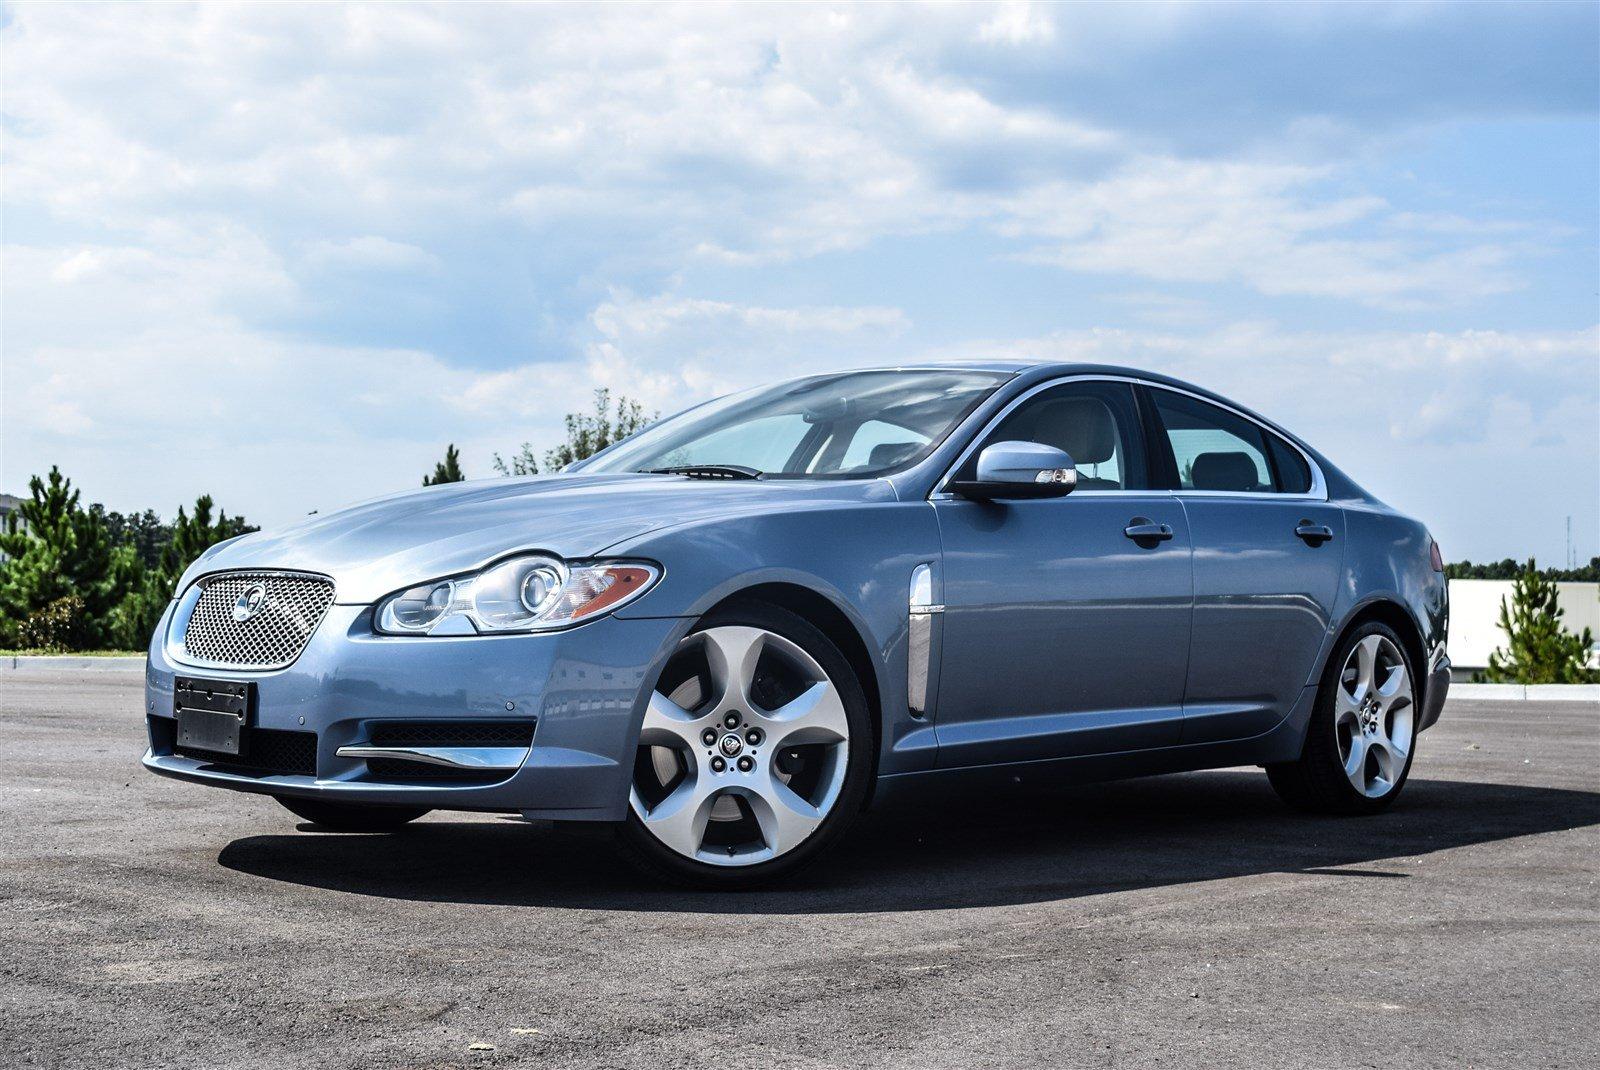 Used 2009 Jaguar XF Supercharged for sale Sold at Gravity Autos Marietta in Marietta GA 30060 29